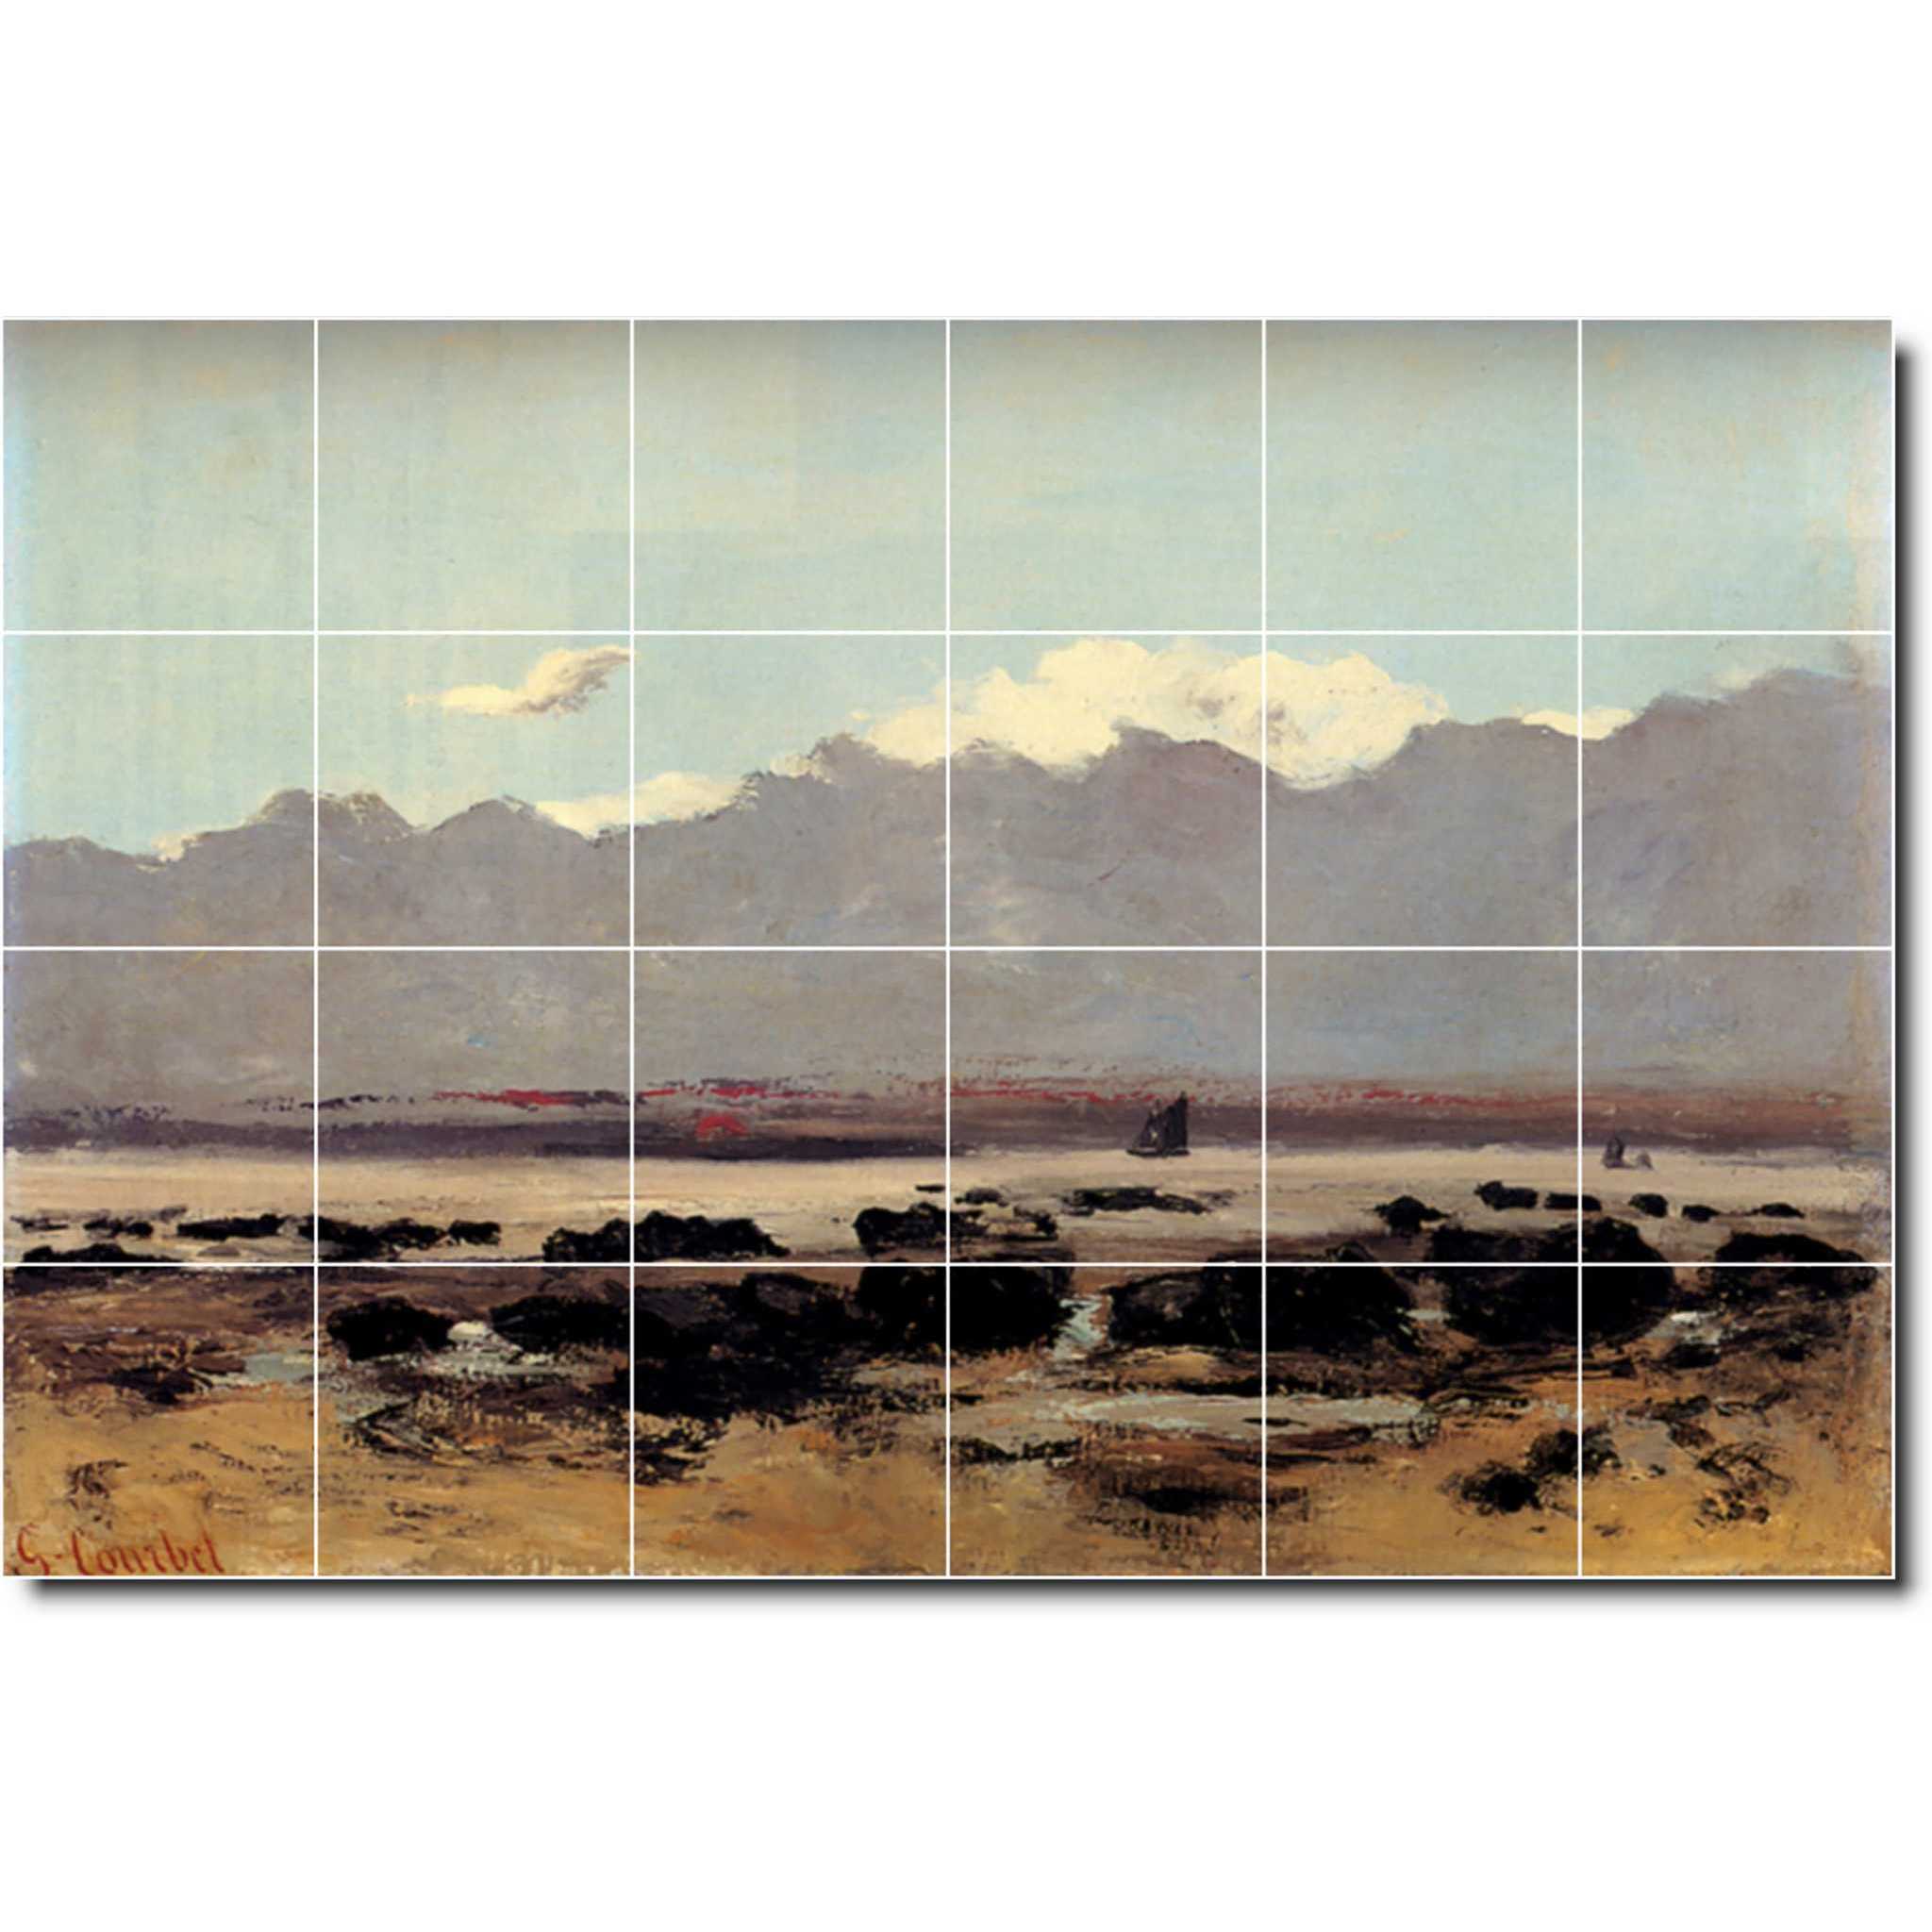 gustave courbet waterfront painting ceramic tile mural p02204